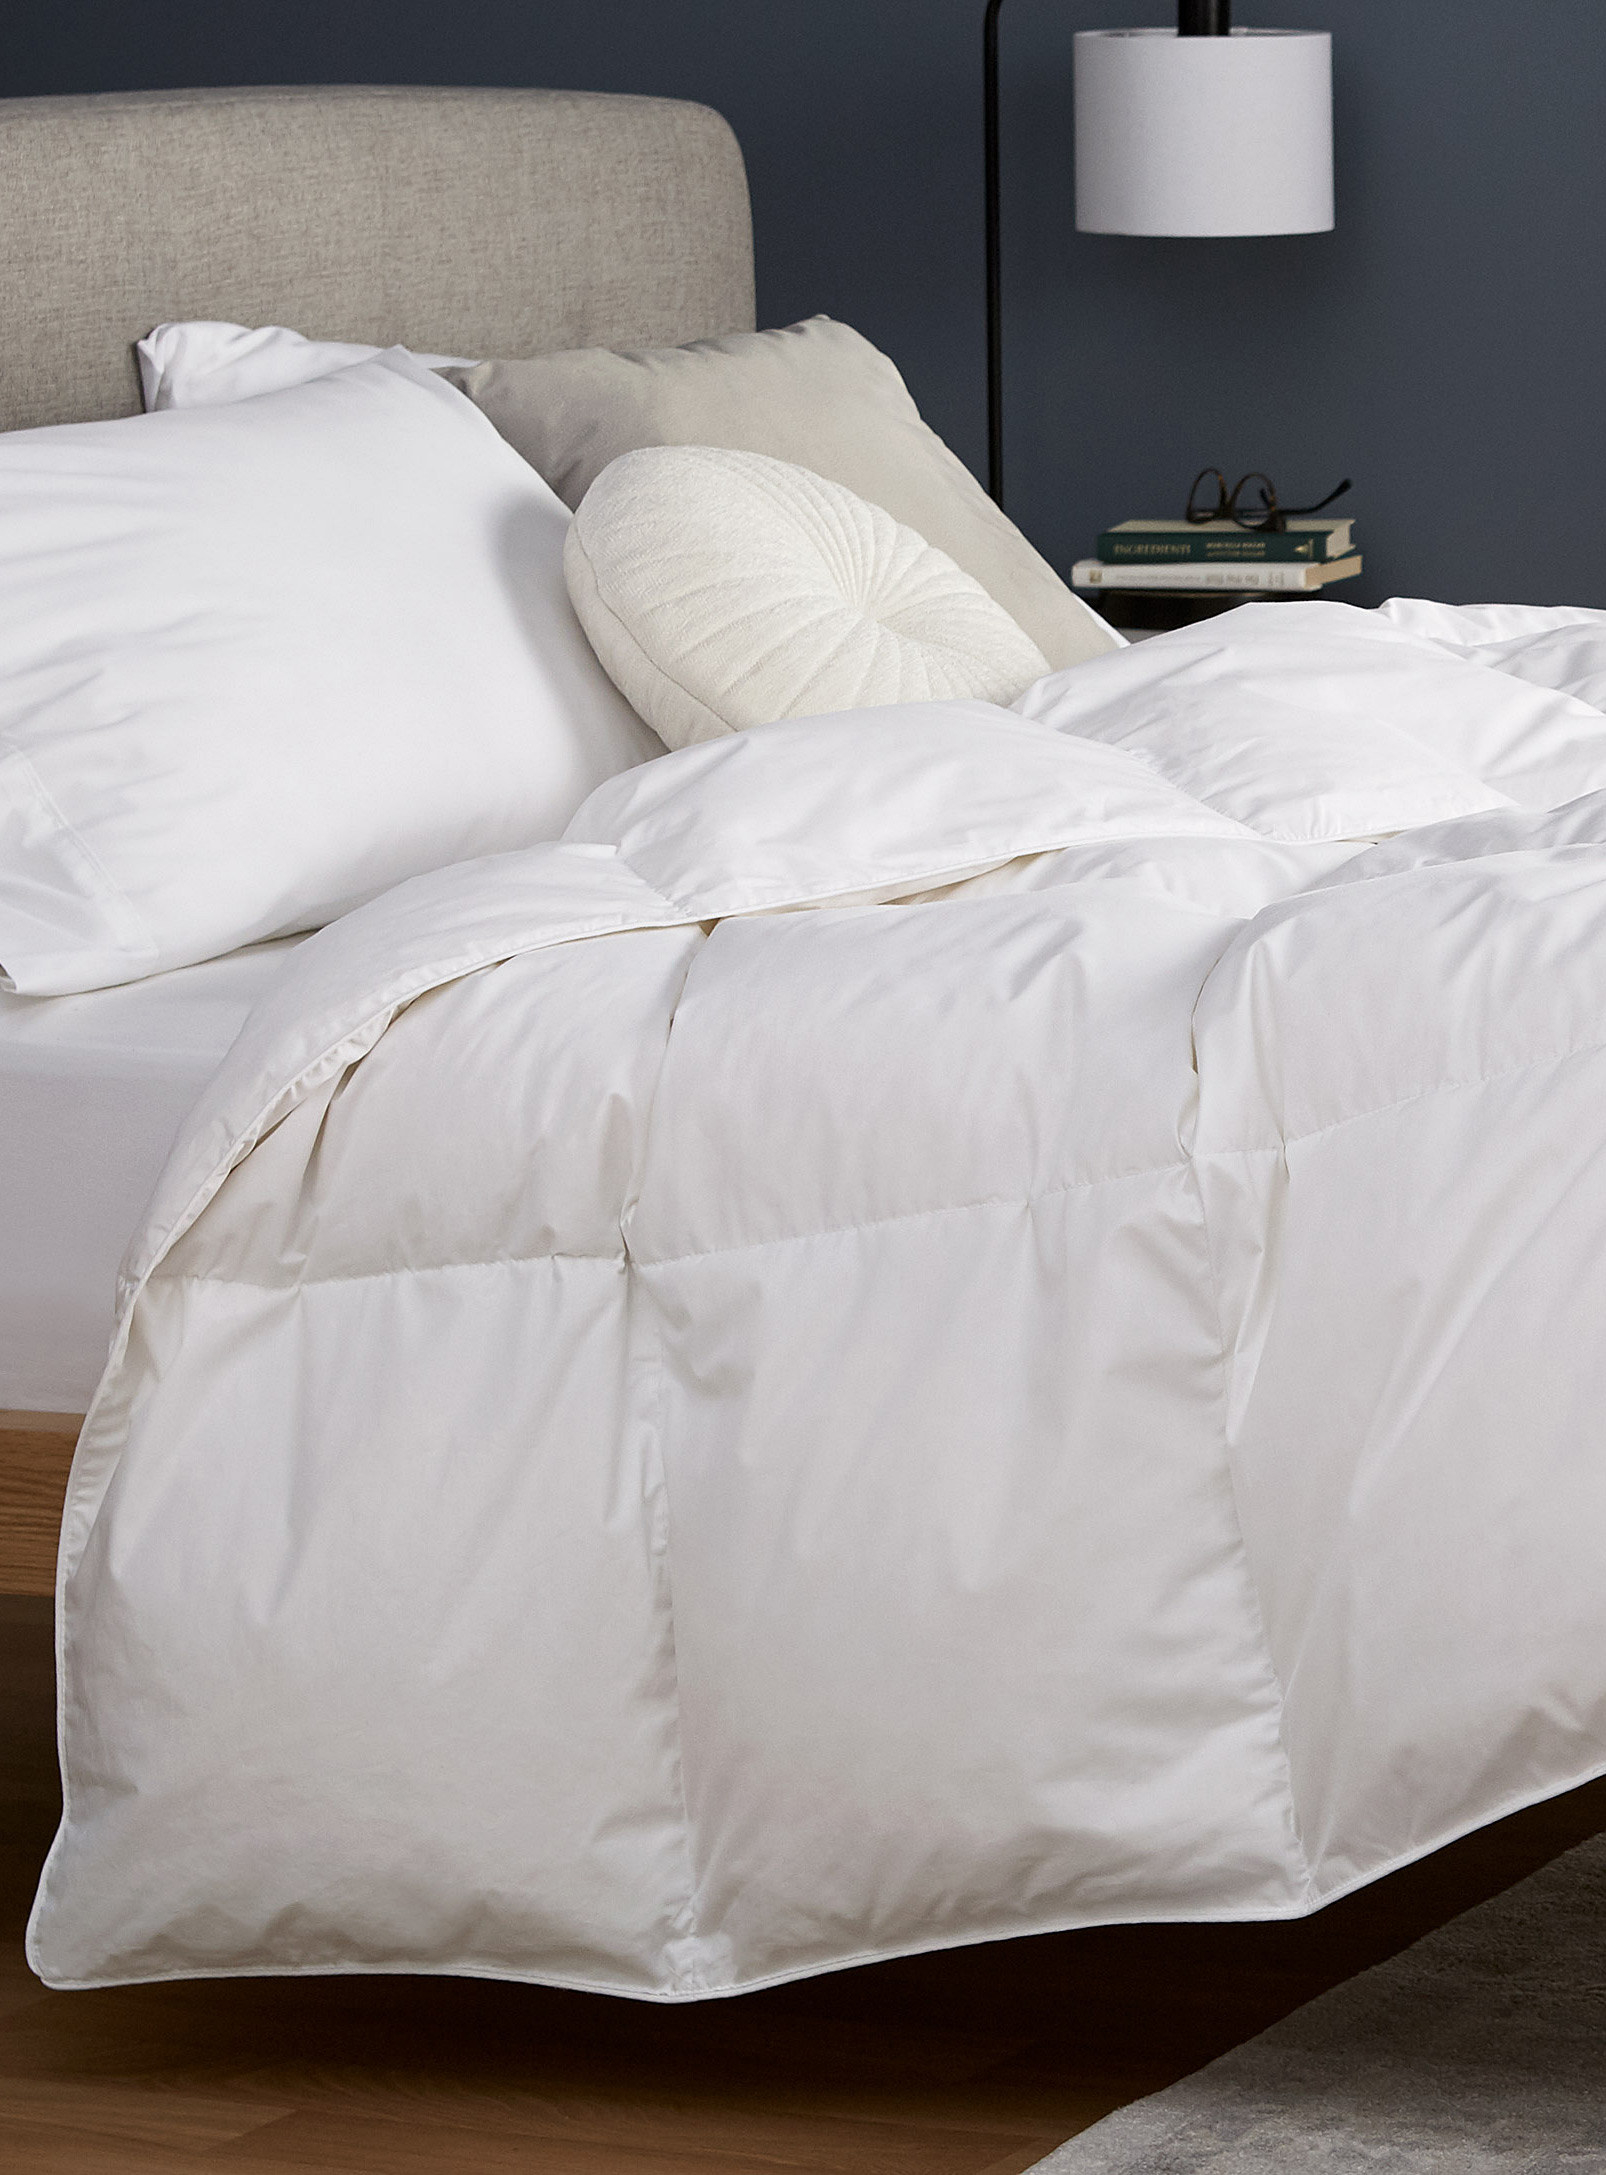 A duvet on a bed with pillows